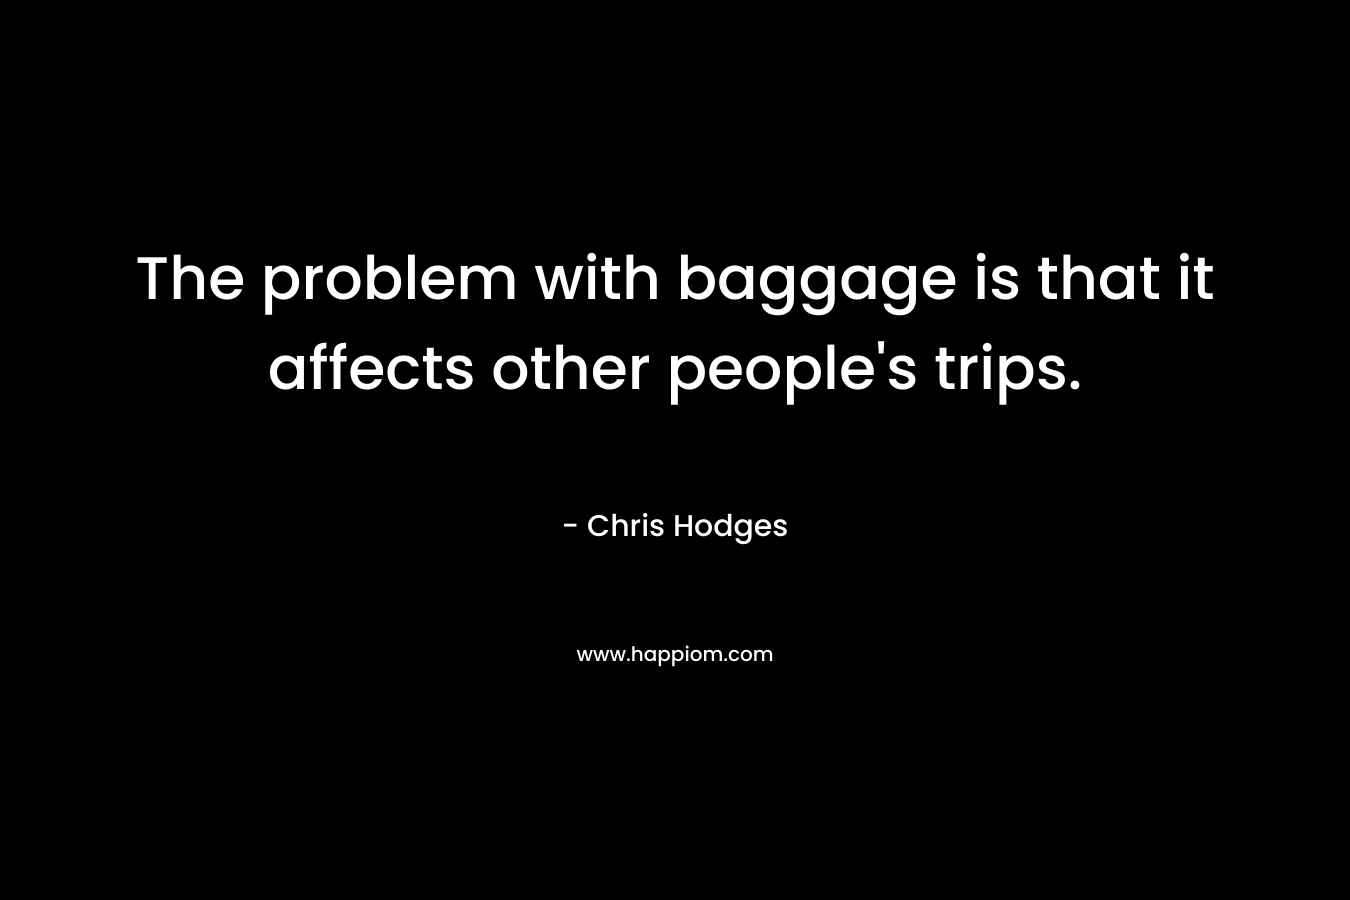 The problem with baggage is that it affects other people's trips.